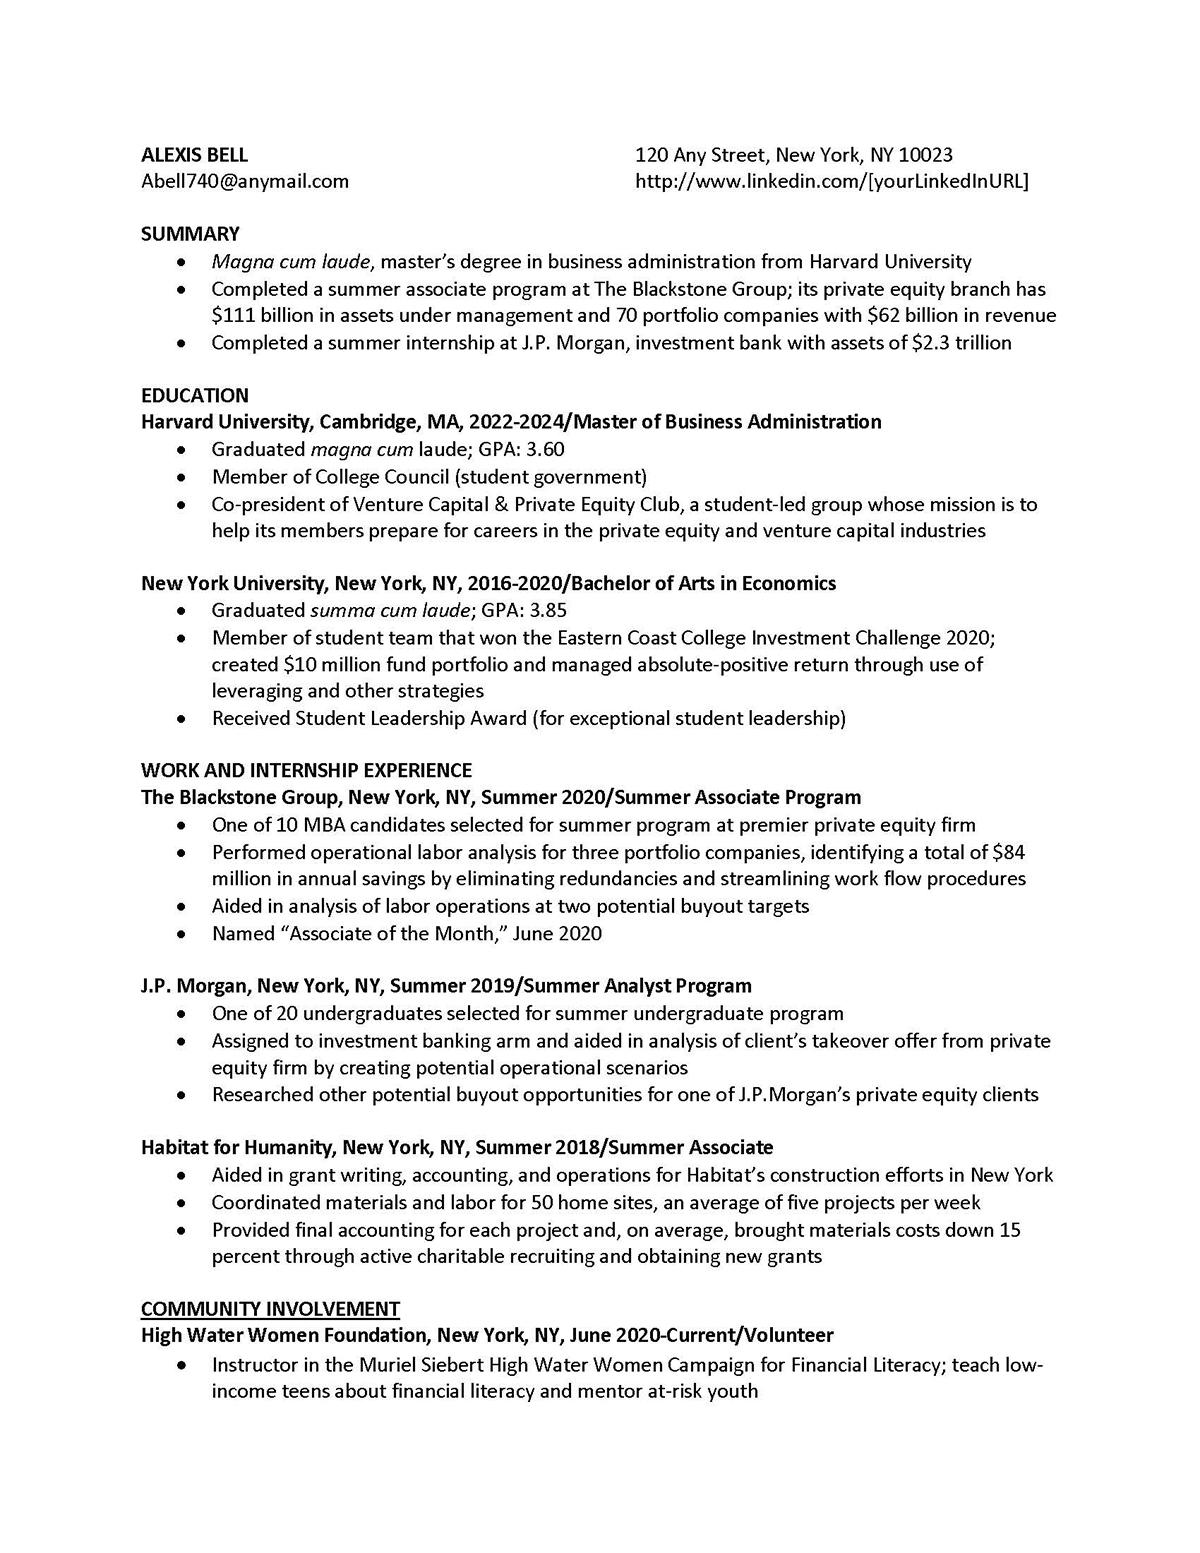 Sample resume: Private Equity, Entry Level, Chronological